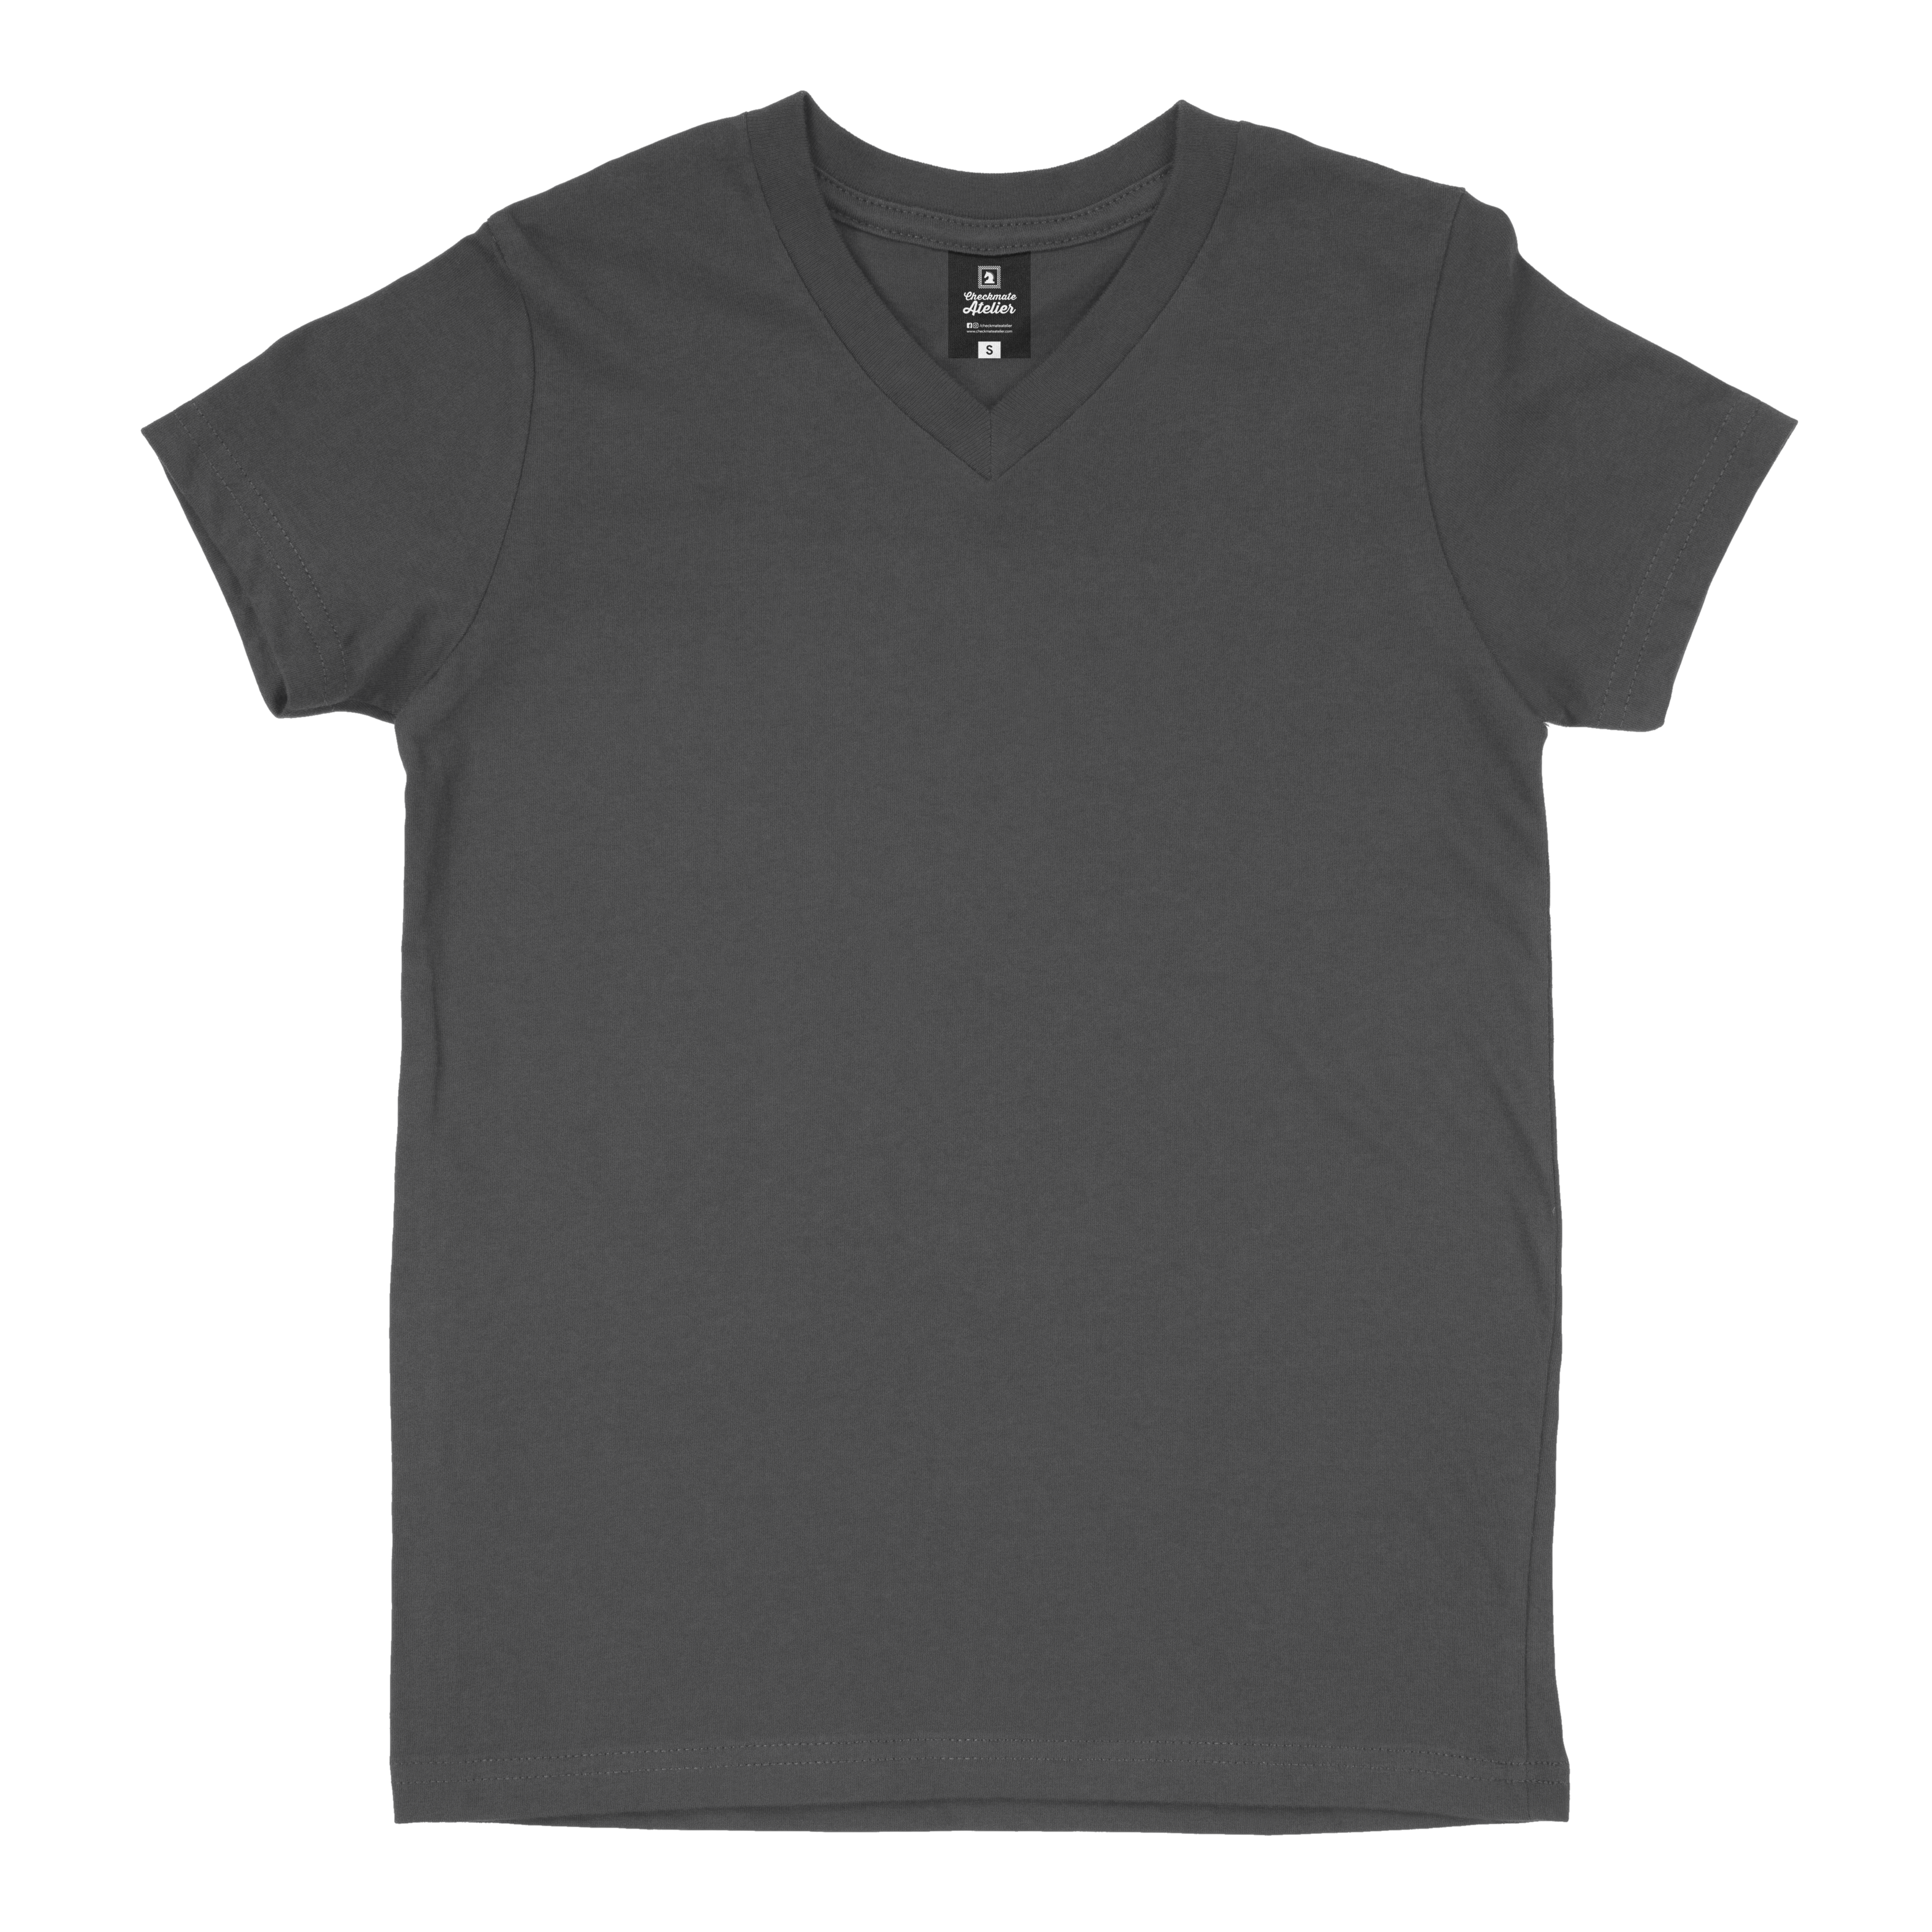 Charcoal V-Neck T-Shirt - Checkmate Atelier - Official Online Store